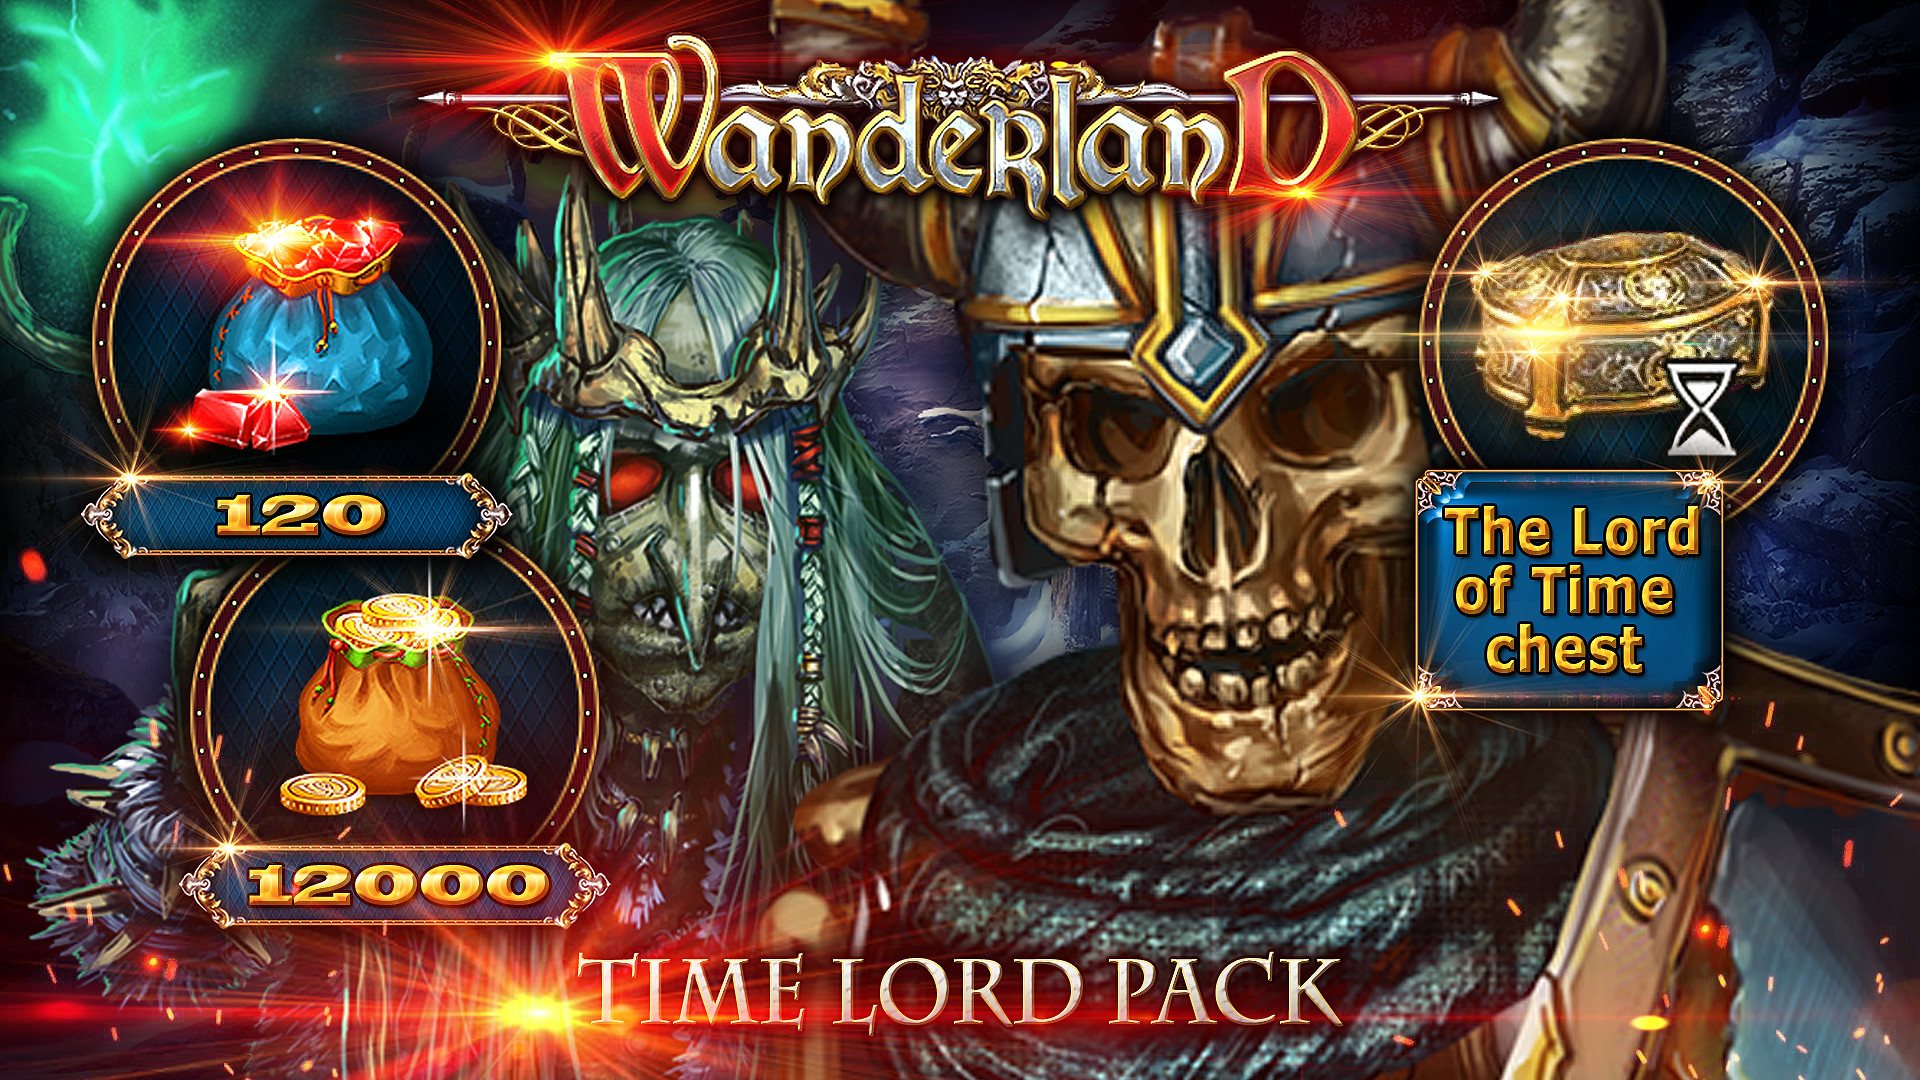 Wanderland - Time Lord Pack DLC Steam CD Key 3.91 USD